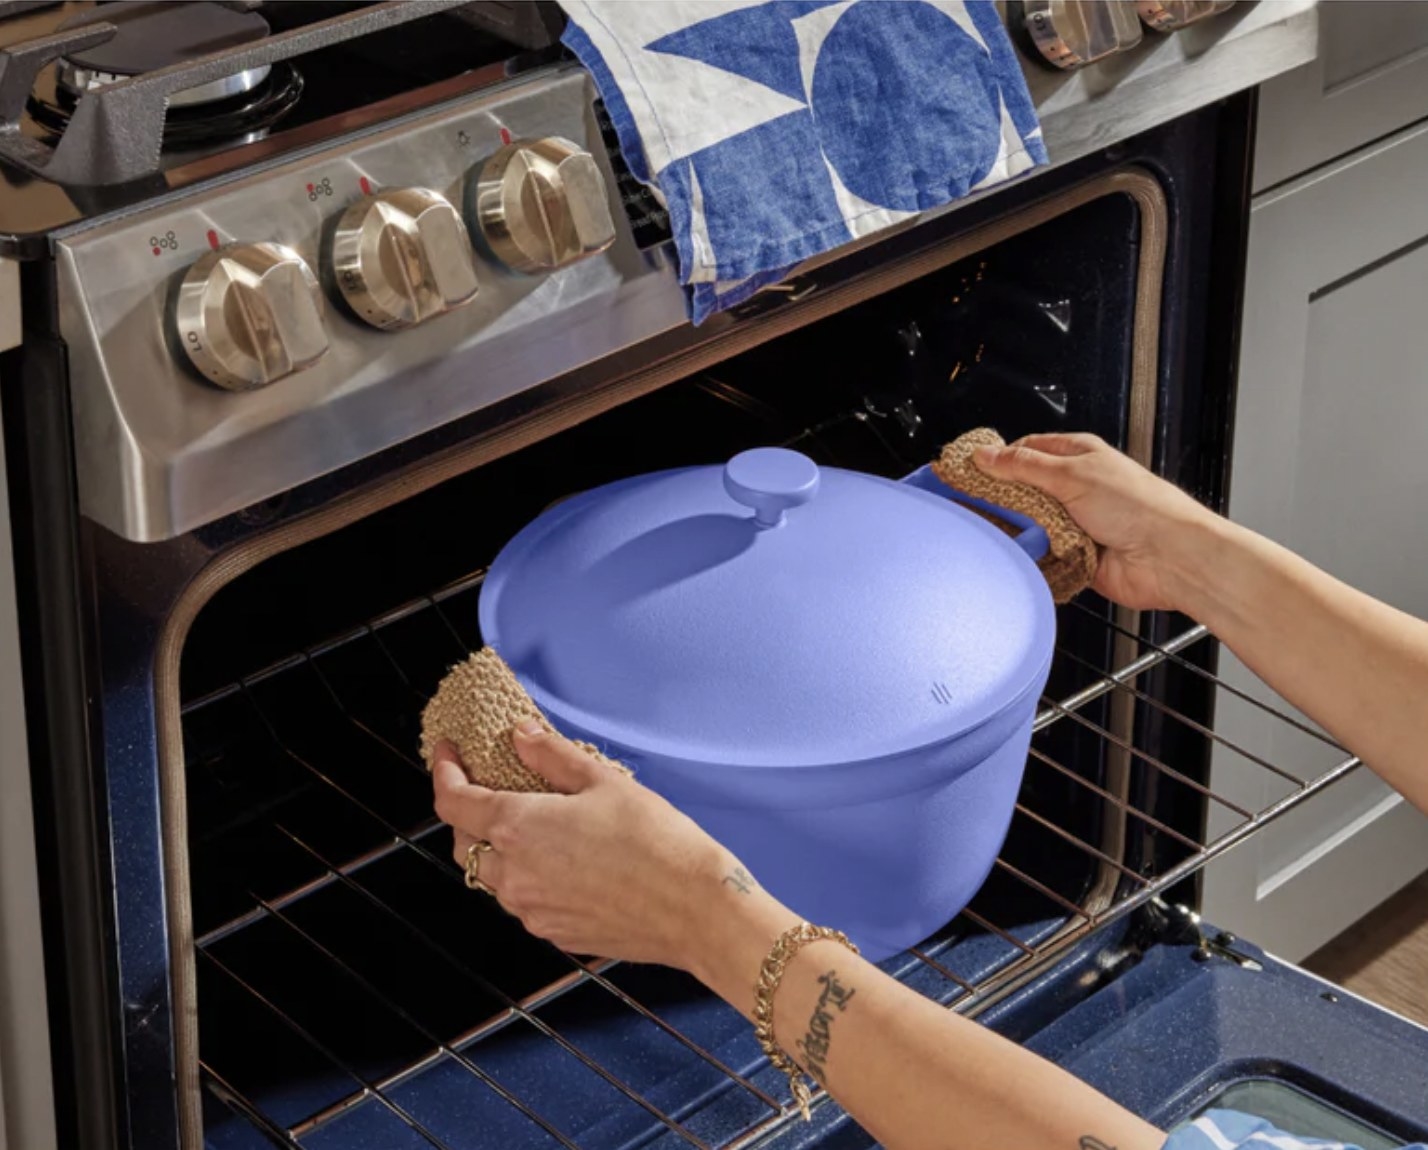 Someone using pot grips on the side handles as they put the blue pot into the oven